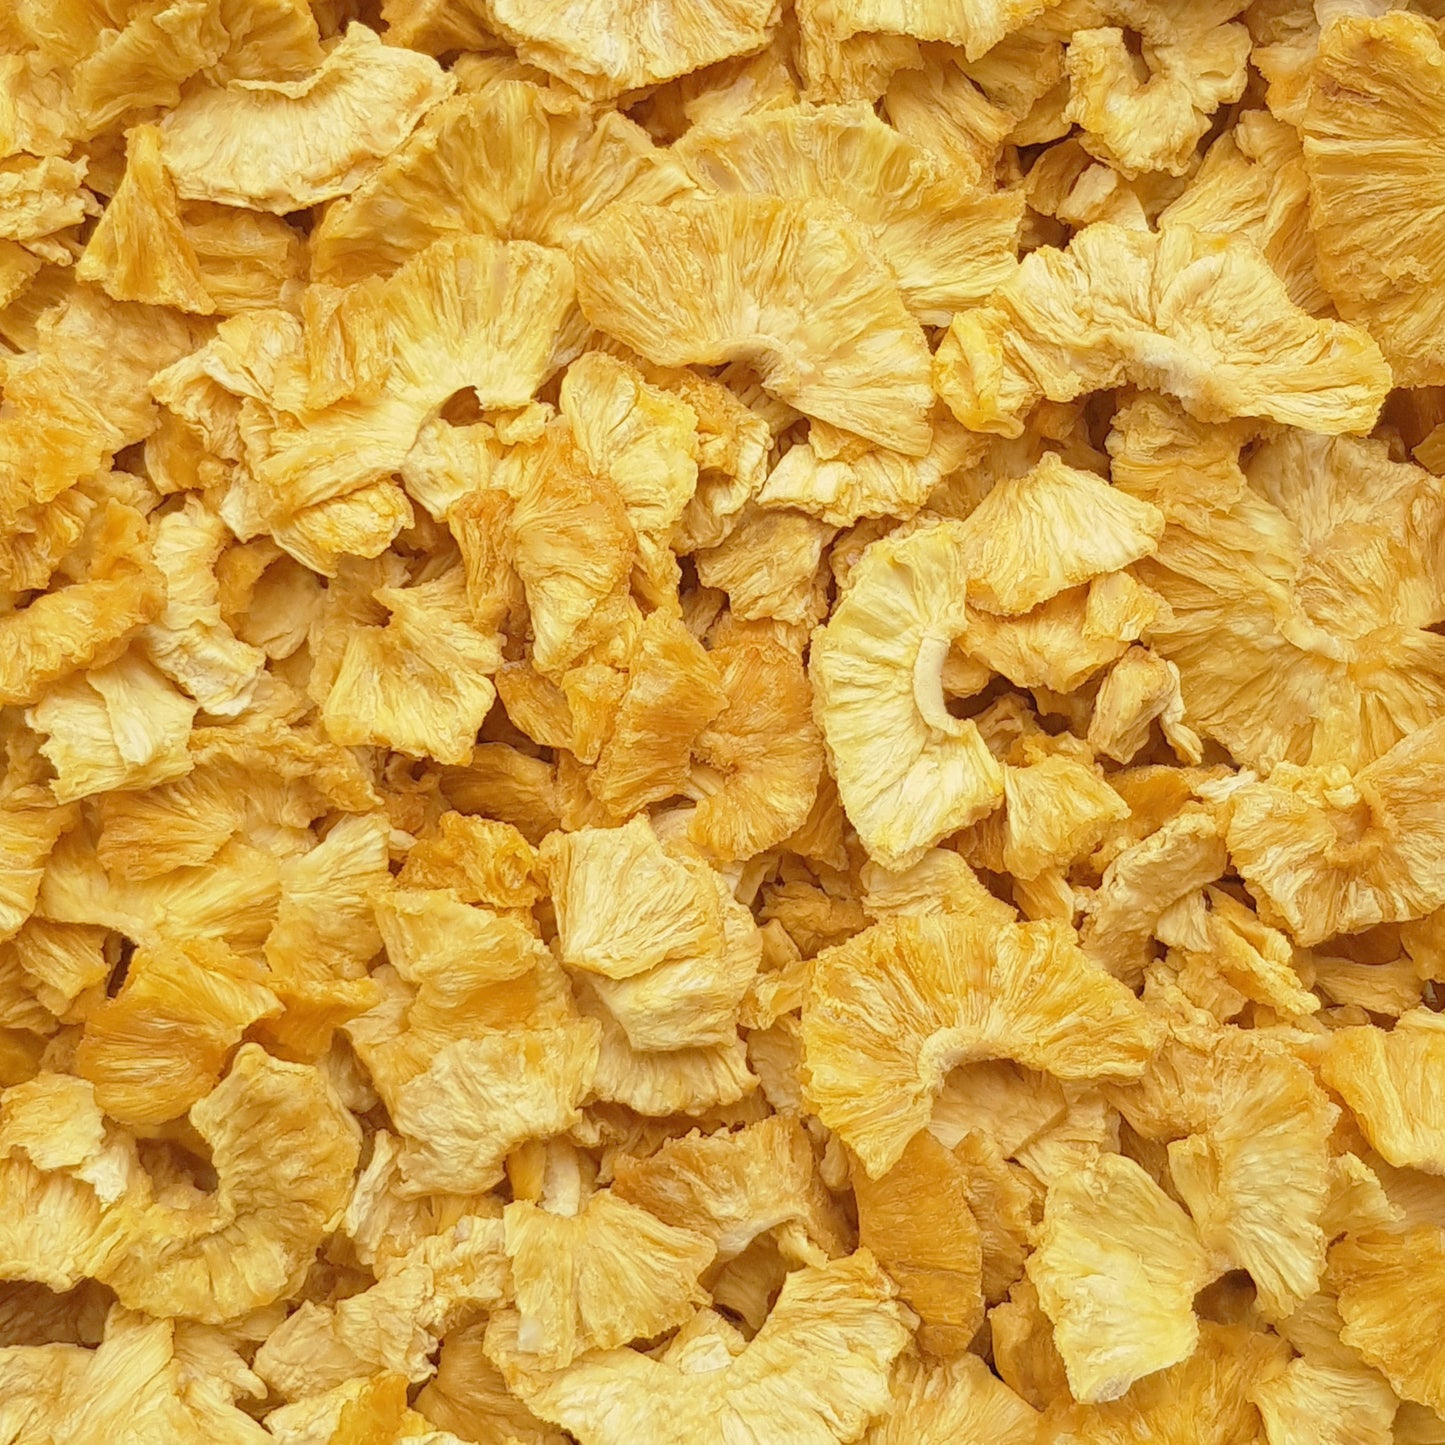 Full frame overhead image of BY NATURE Dried Pineapple Pieces - preservative-free.